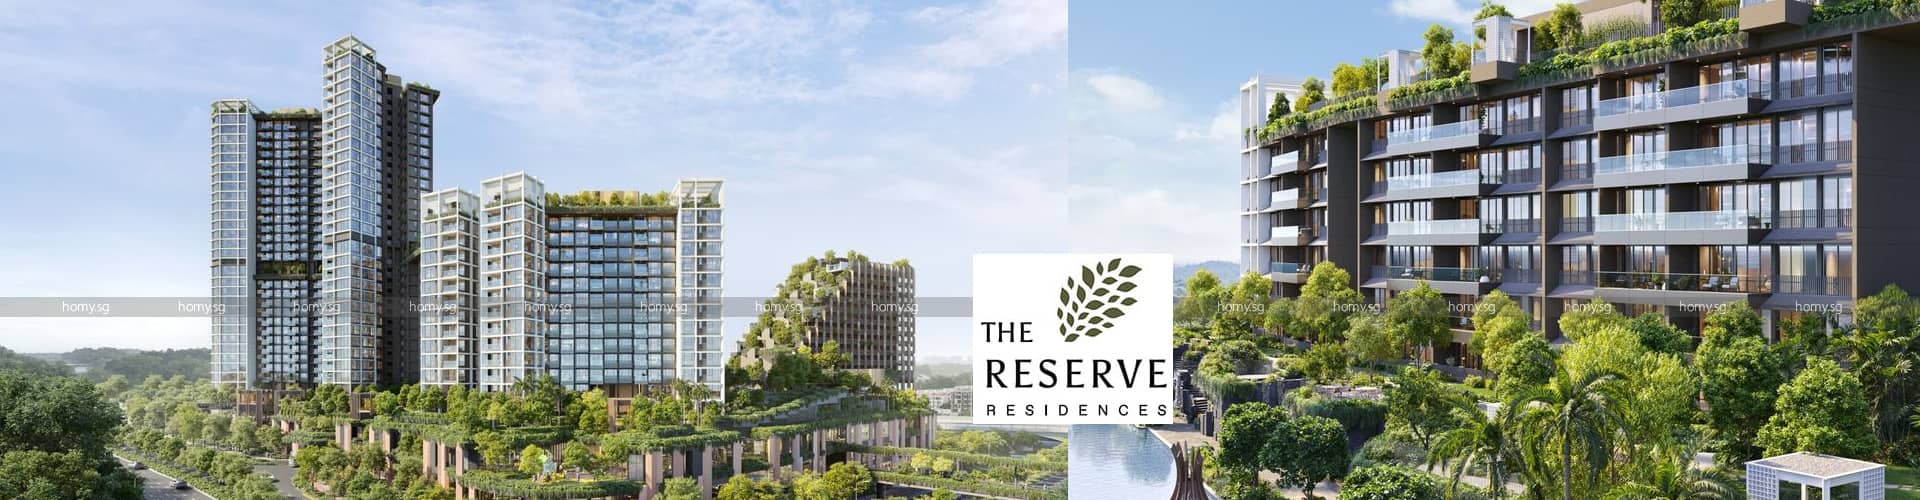 The Reserve Residences